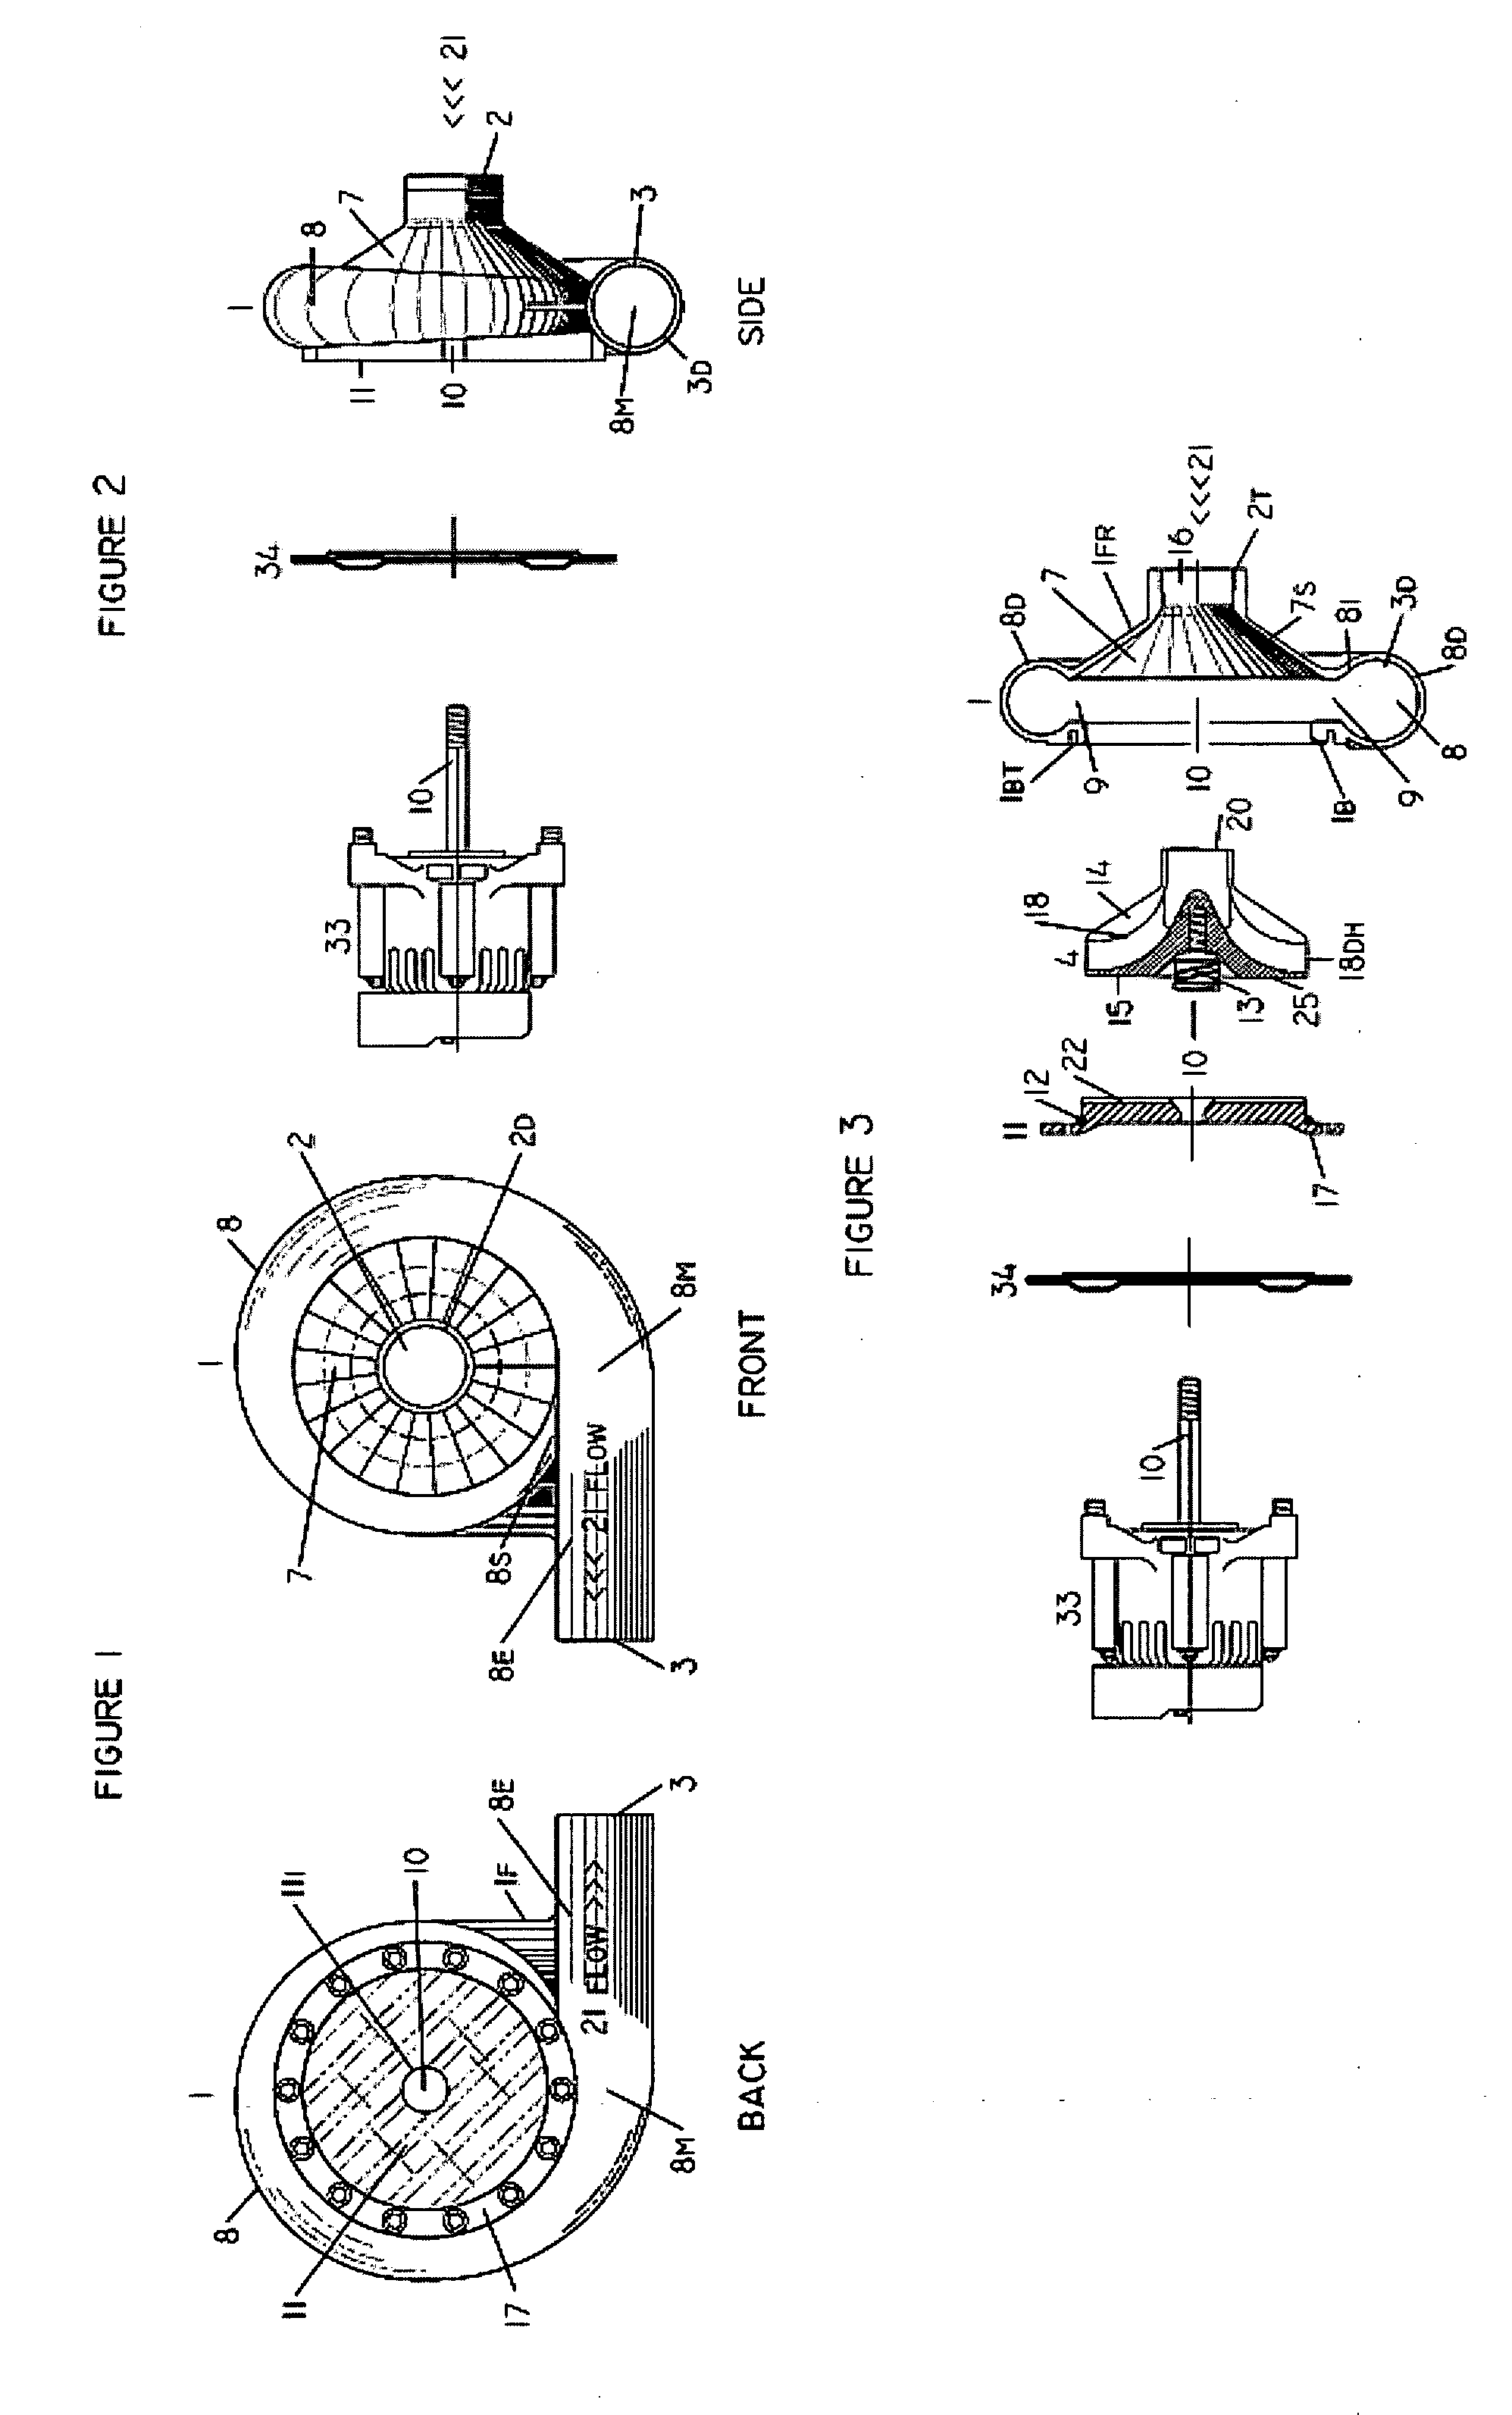 Method for creating a Low Fluid Pressure Differential Electrical Generating System